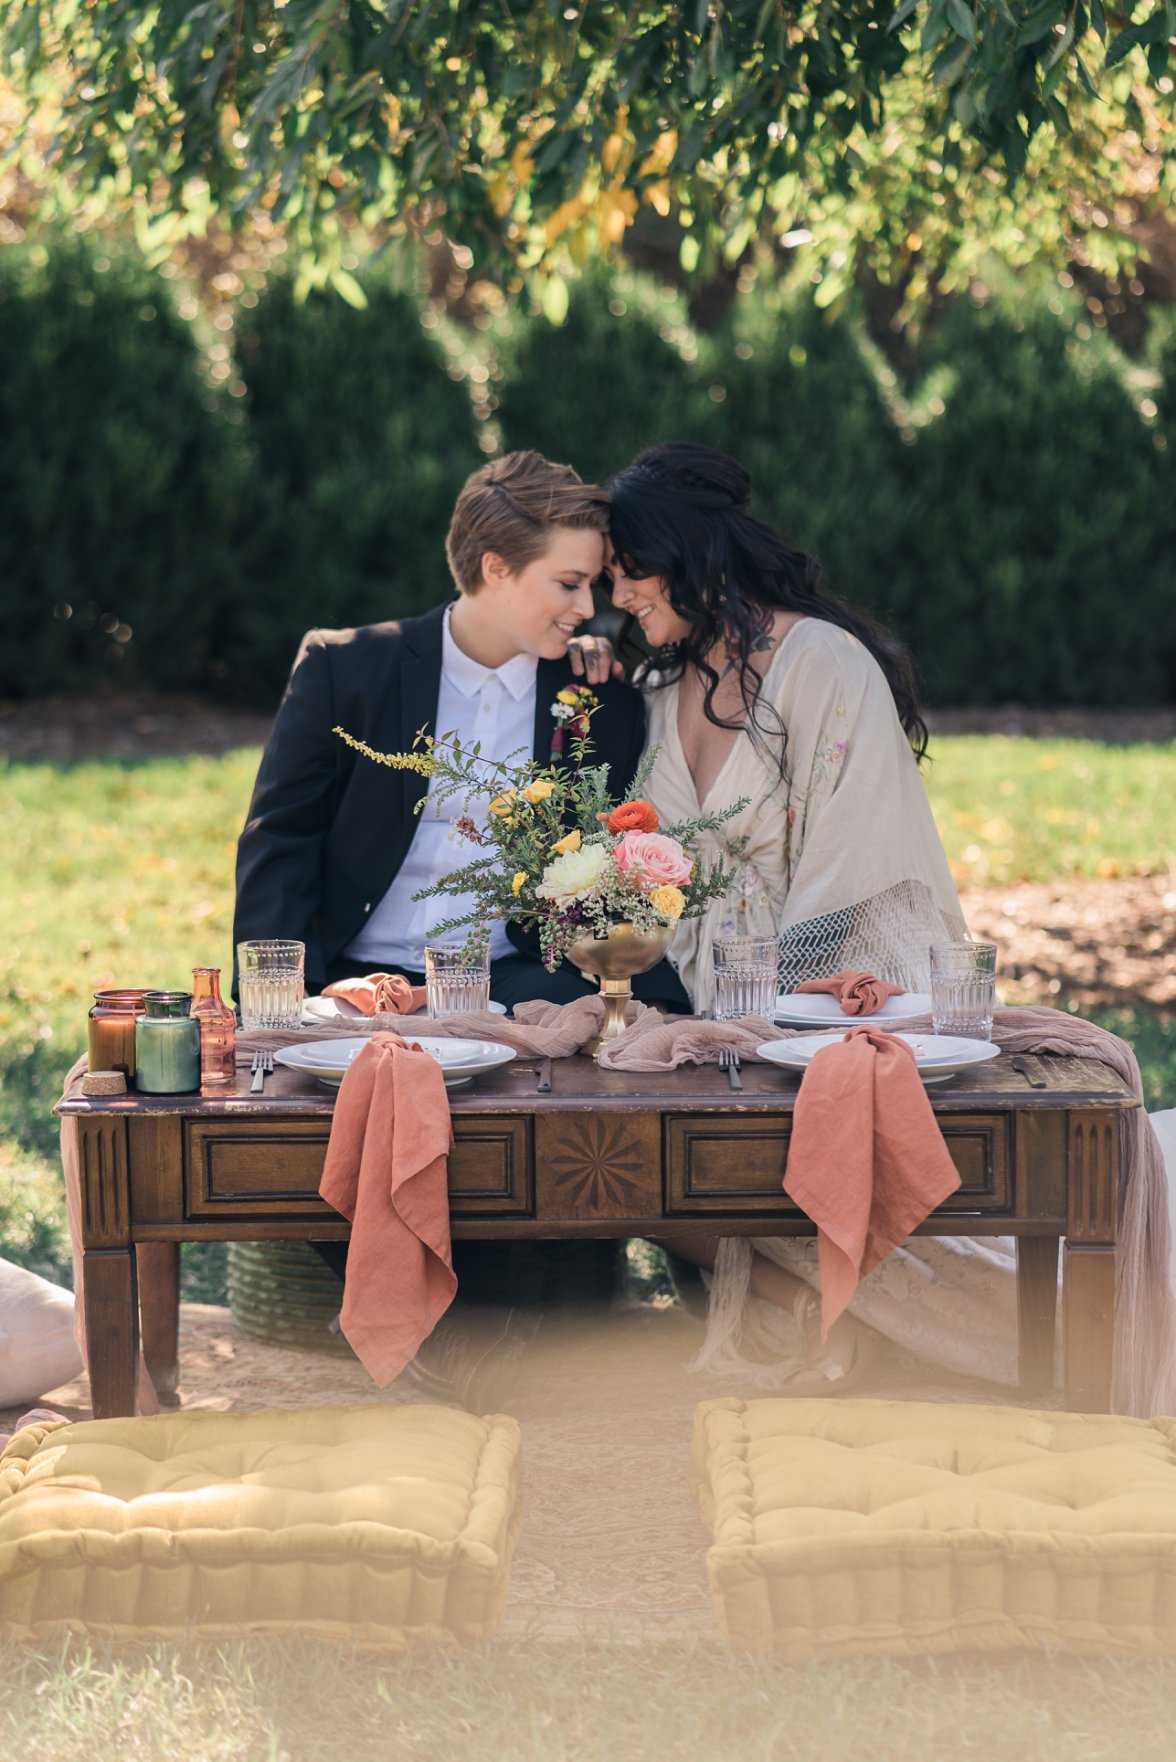 Lesbian couple setting together at table | Market at Grelen Wedding